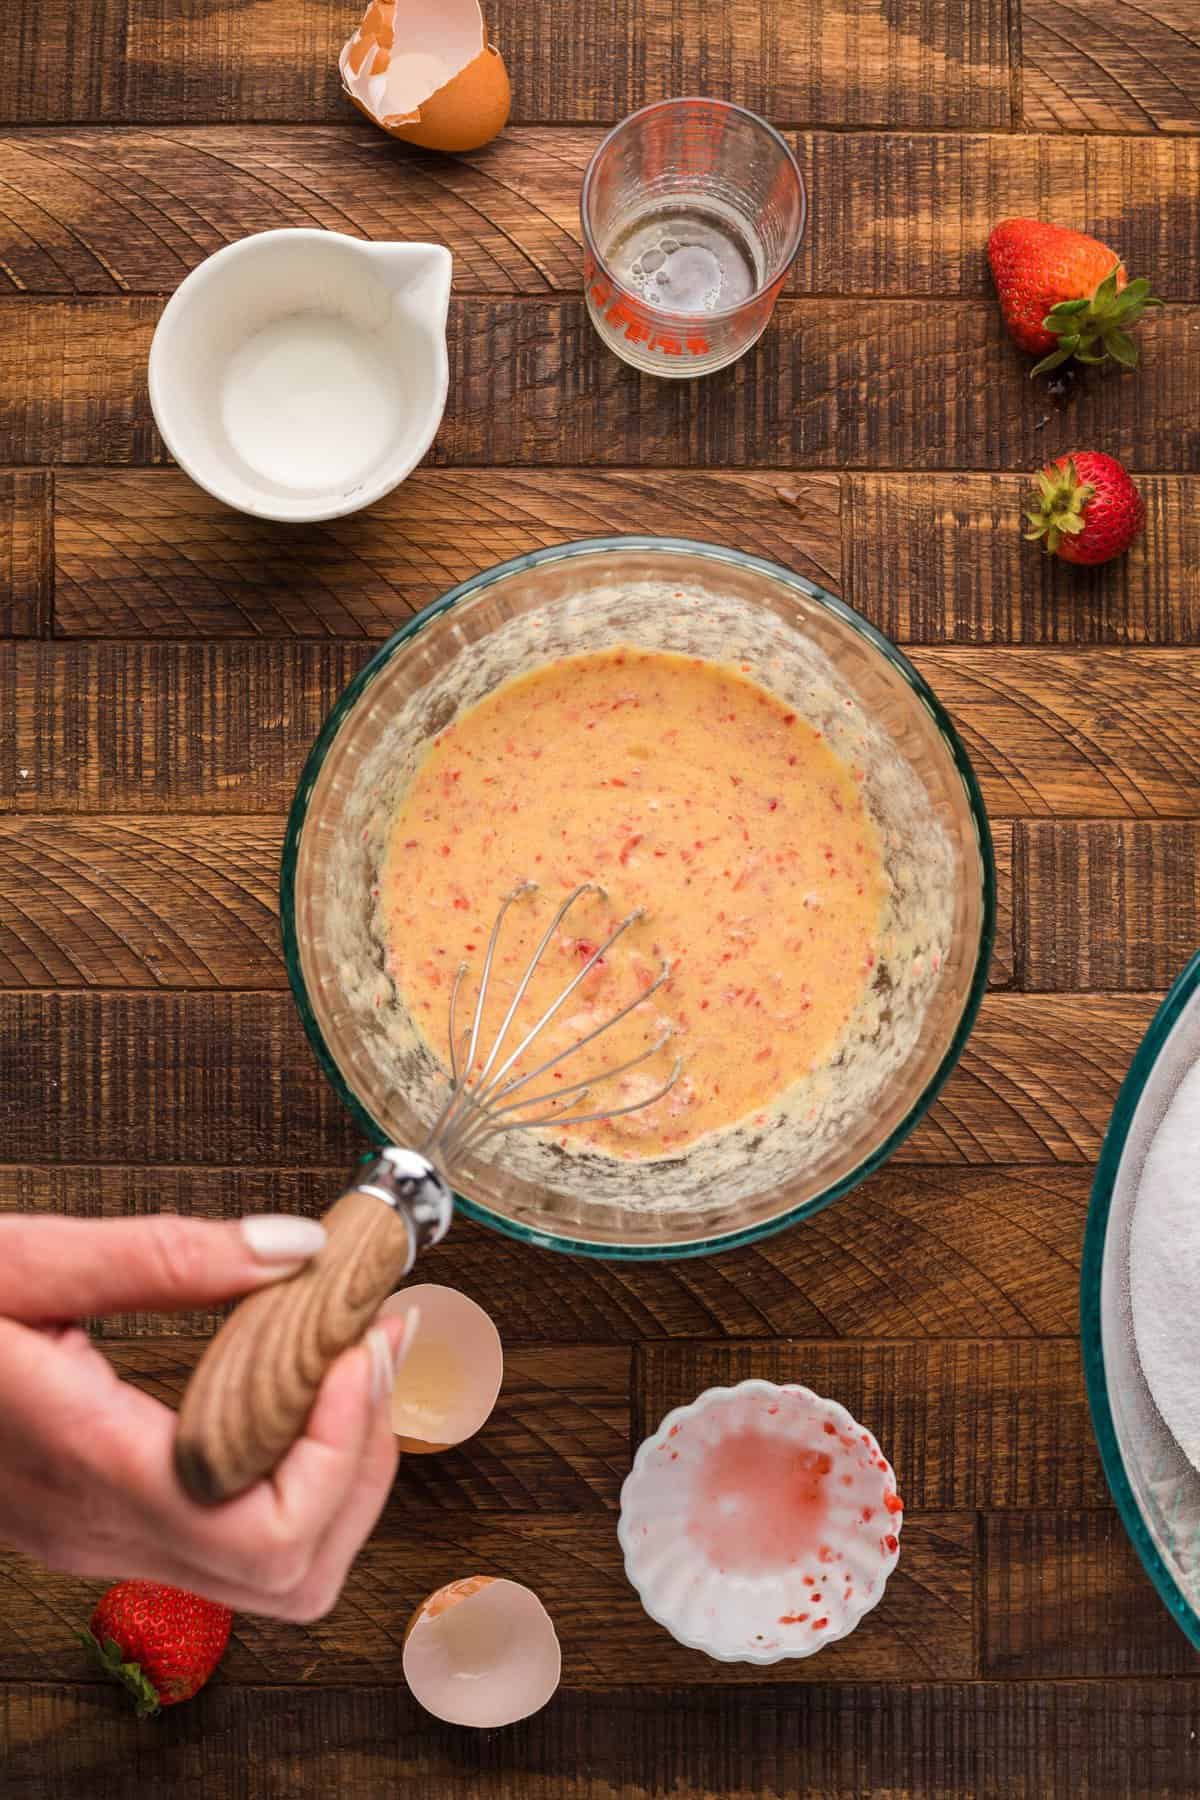 hand whisking together the strawberry donut batter.